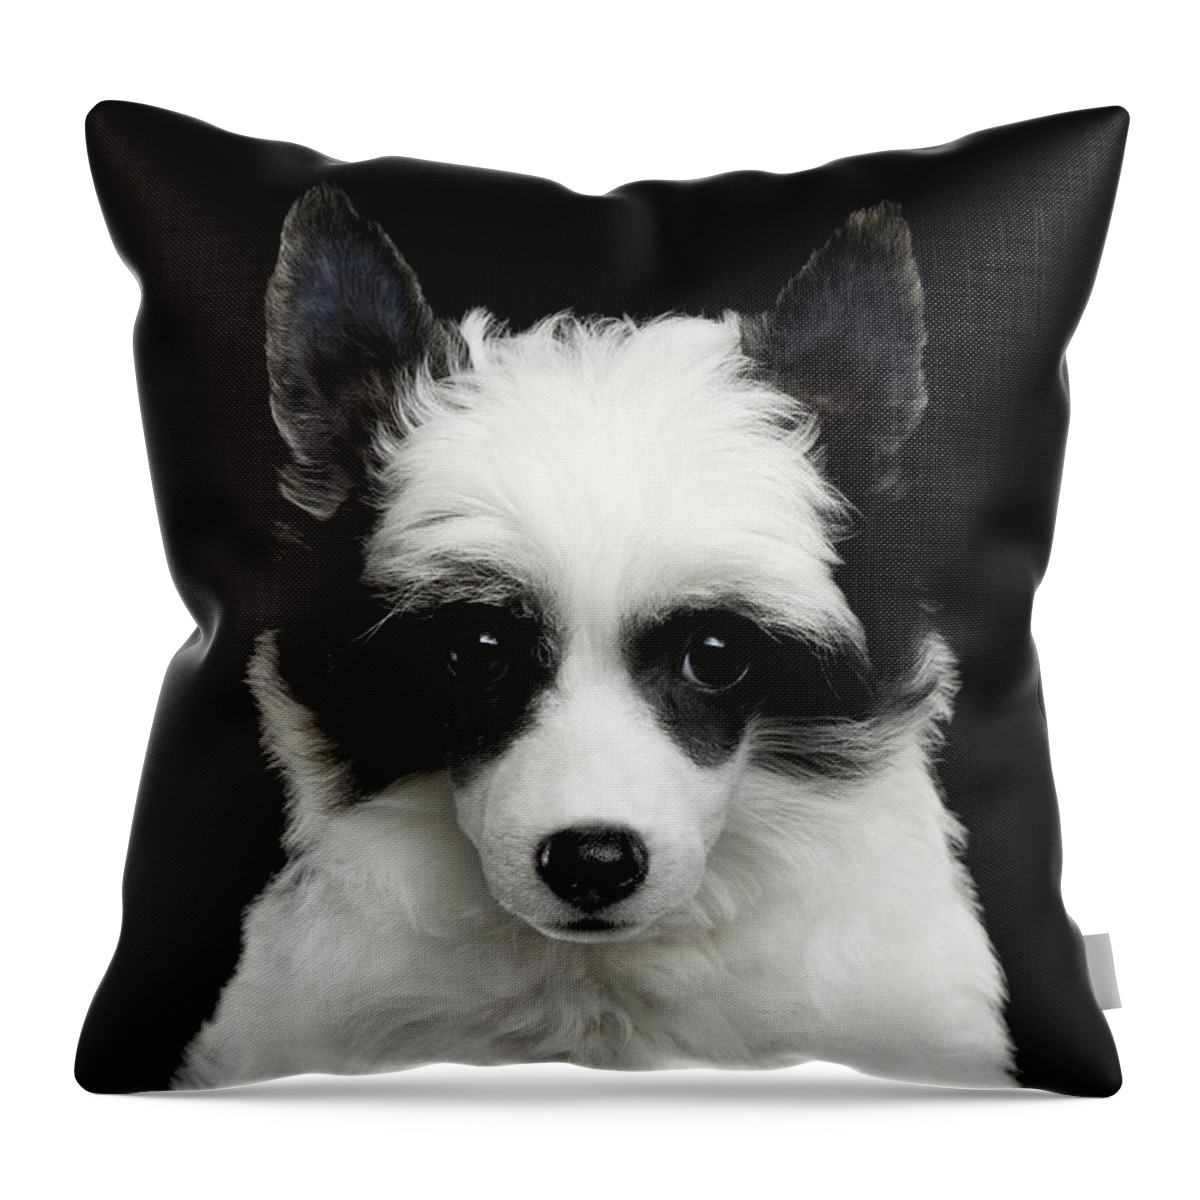 Closeup Throw Pillow featuring the photograph Chinese Crested Puppy by Sergey Taran